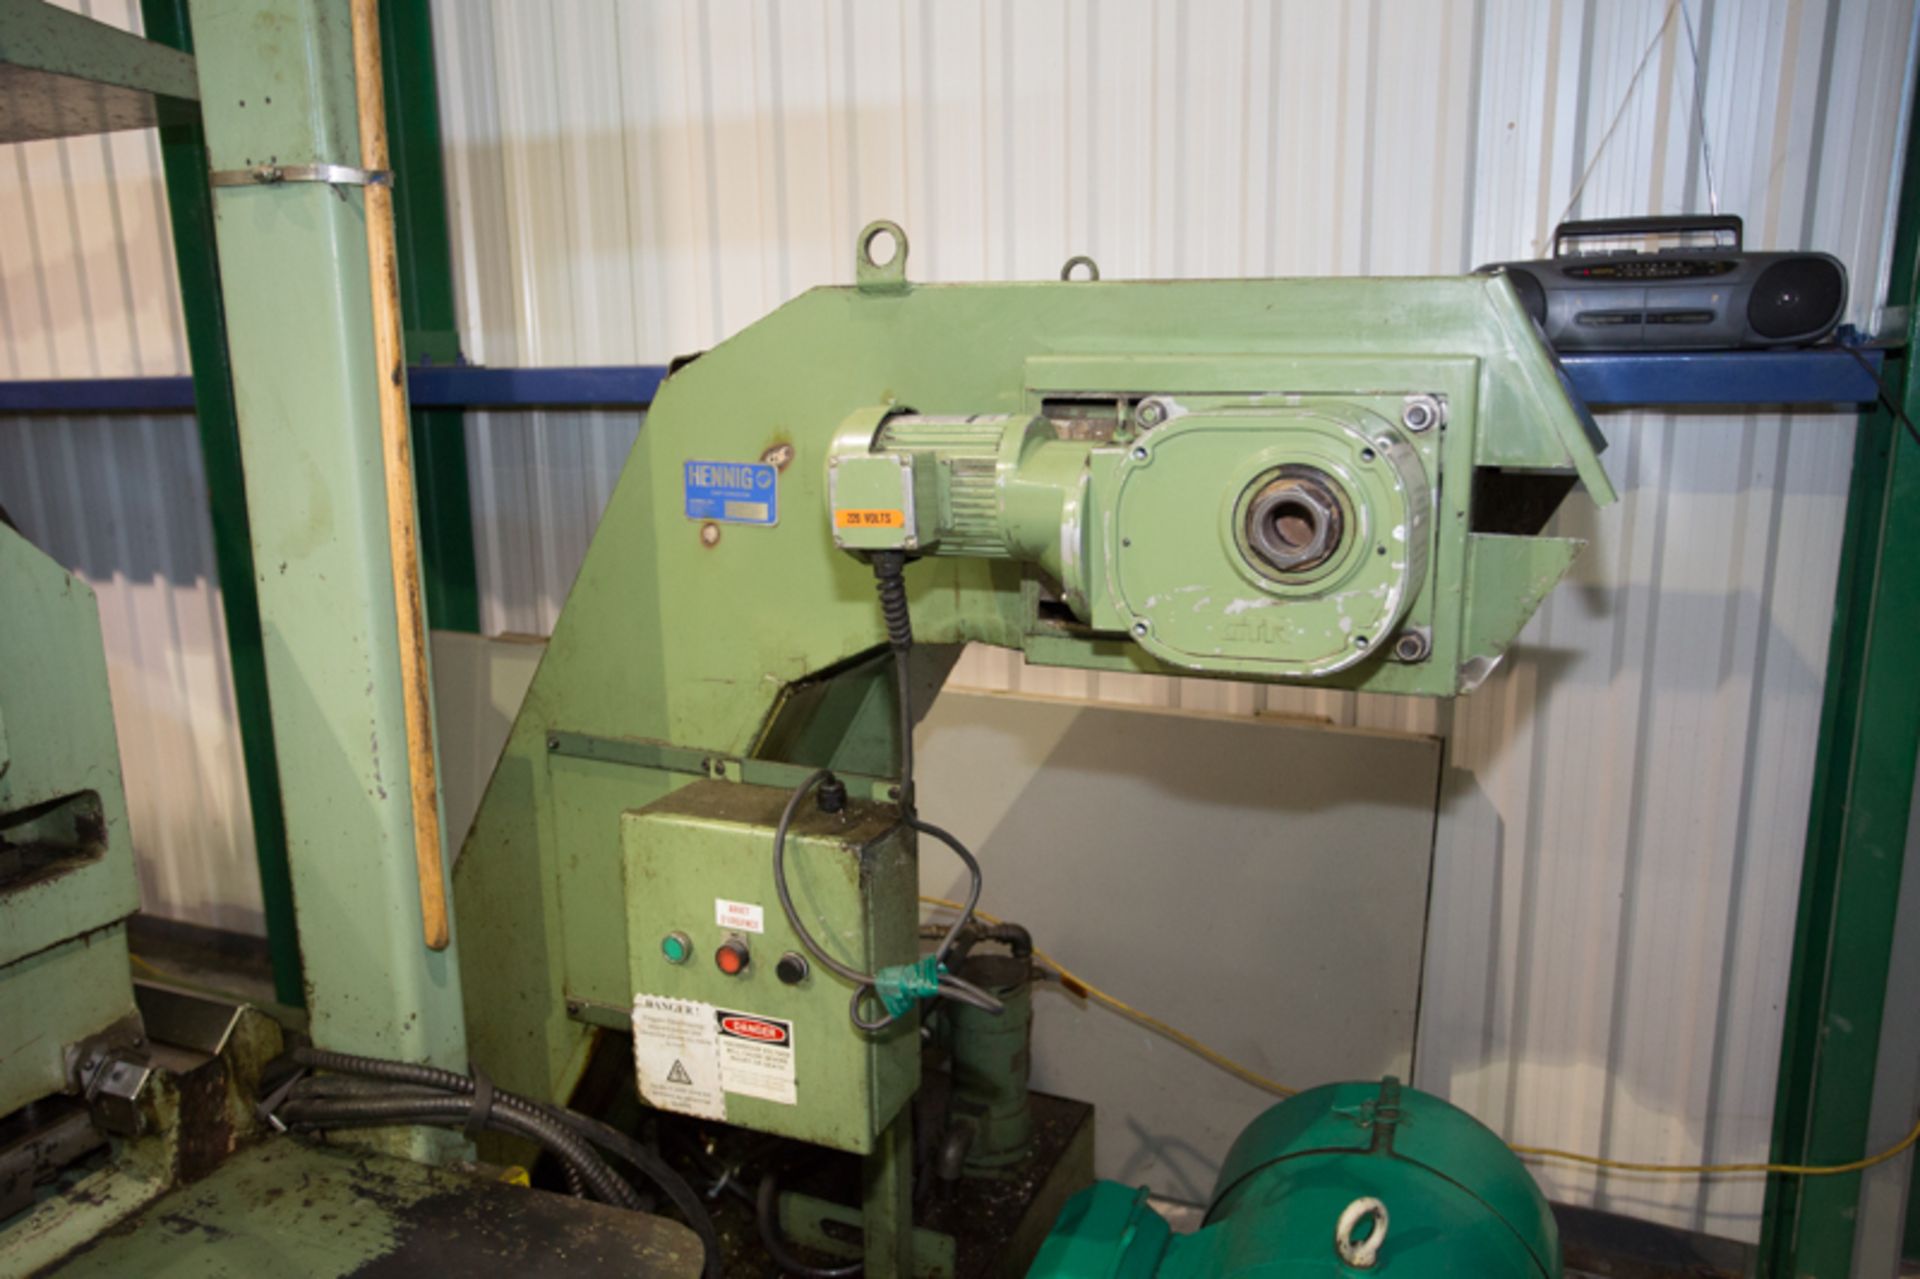 DAINICHI CNC LATHE MOD. M95-400, 40" SWING X 14FT BETWEEN CENTERS, STEADY REST, 8 STATION TURRET - Image 11 of 16